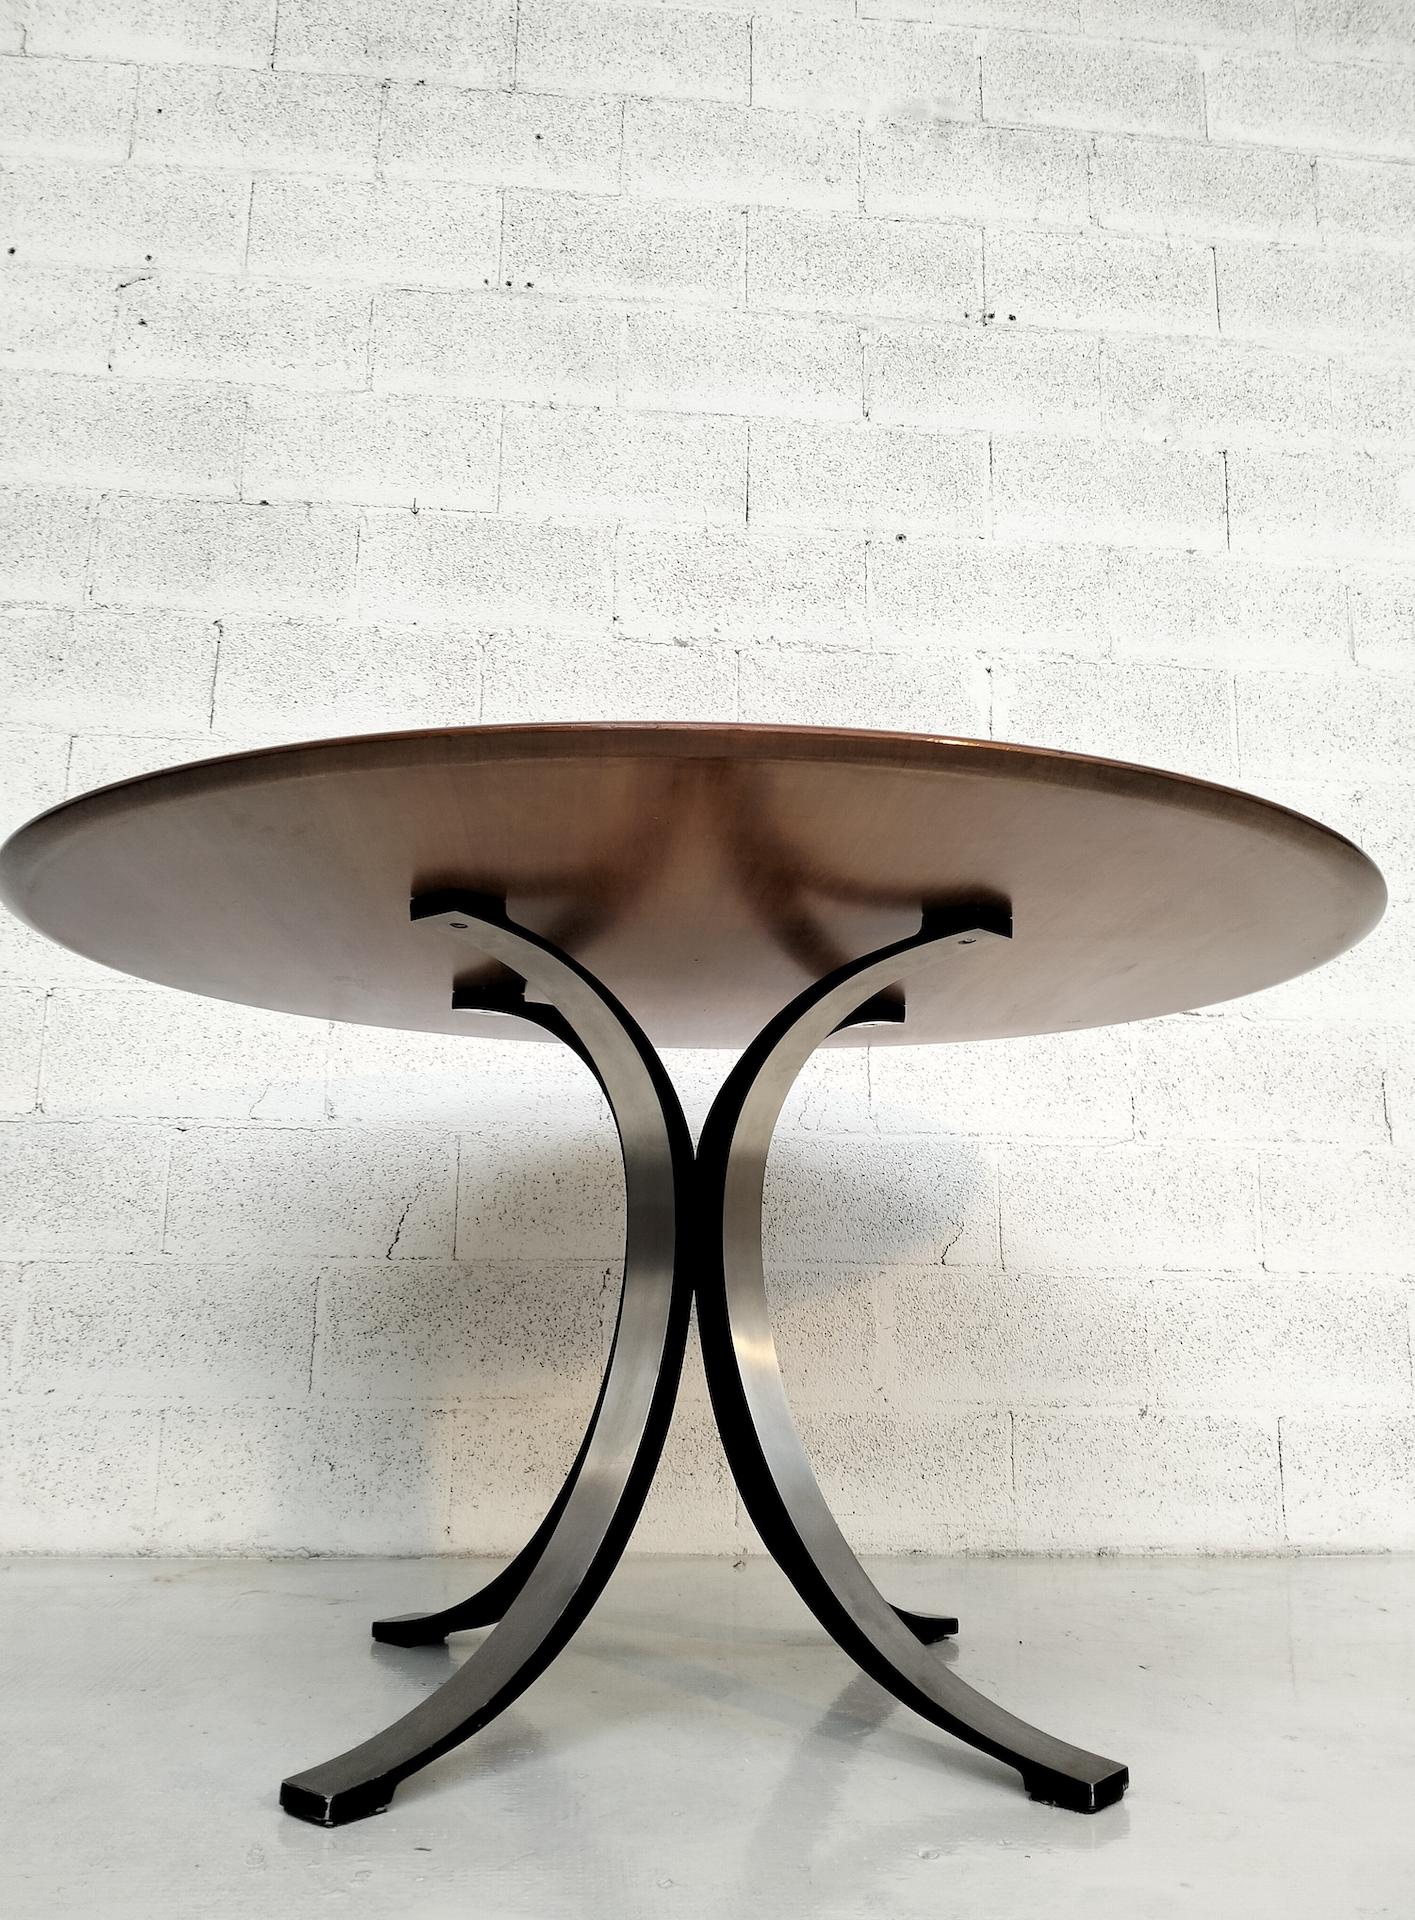 The series of tables T69 and T102, born in 1963 from the fruitful collaboration between Osvaldo Borsani and Eugenio Gerli, take up in their shapes some characteristic signs typical of Tecno production. The intensive use of aluminum casting